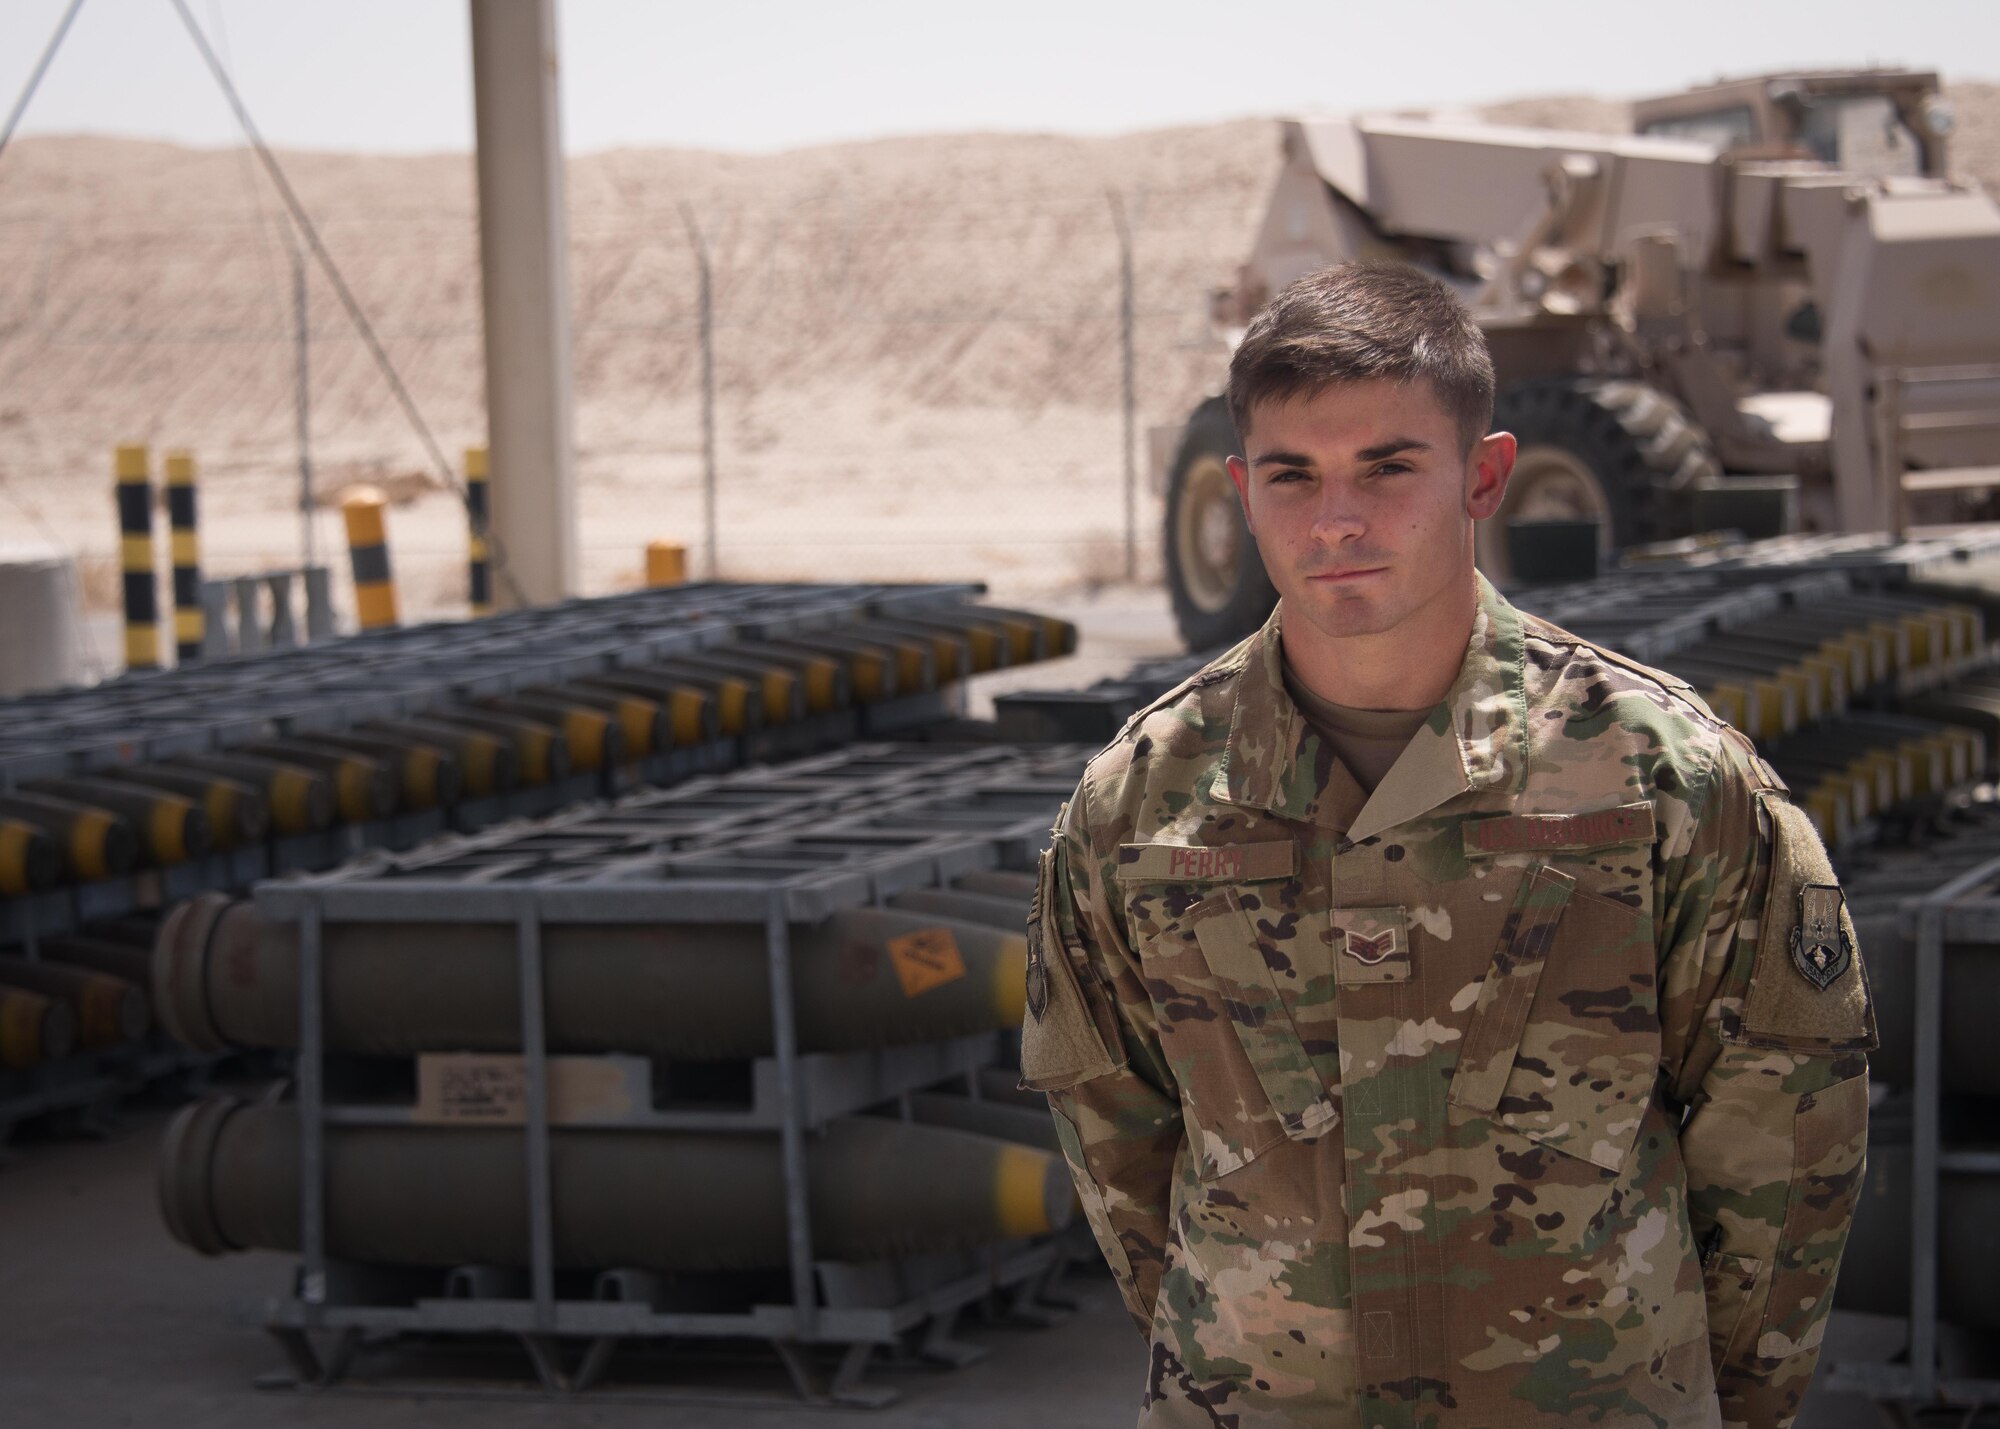 This week’s Rock Solid Warrior is Senior Airman John Perry III, a munitions system crew chief with the 386th Maintenance Squadron, deployed from Langley Air Force Base, Va. The Rock Solid Warrior program is a way to recognize and spotlight the Airmen of the 386th Air Expeditionary Wing for their positive impact and commitment to the mission.